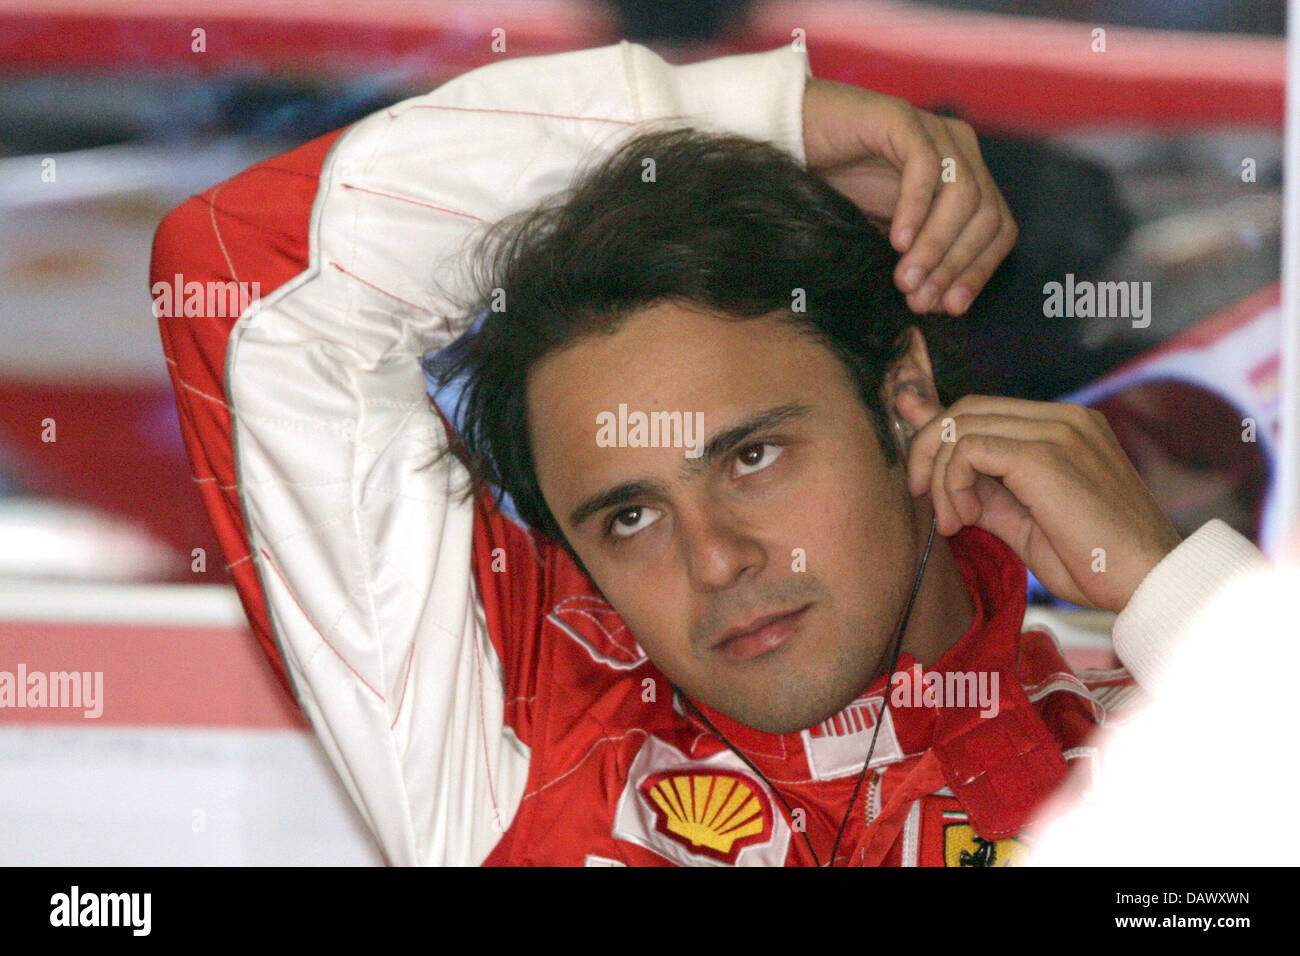 Brazilian Formula One pilot Felipe Massa of Ferrari plugs his ears during the third practice session at the Circuit de Catalunya race track near Barcelona, Spain, 12 May 2007. The 2007 Formula 1 Grand Prix of Spain takes place on 13 May. Photo: Jens Buettner Stock Photo